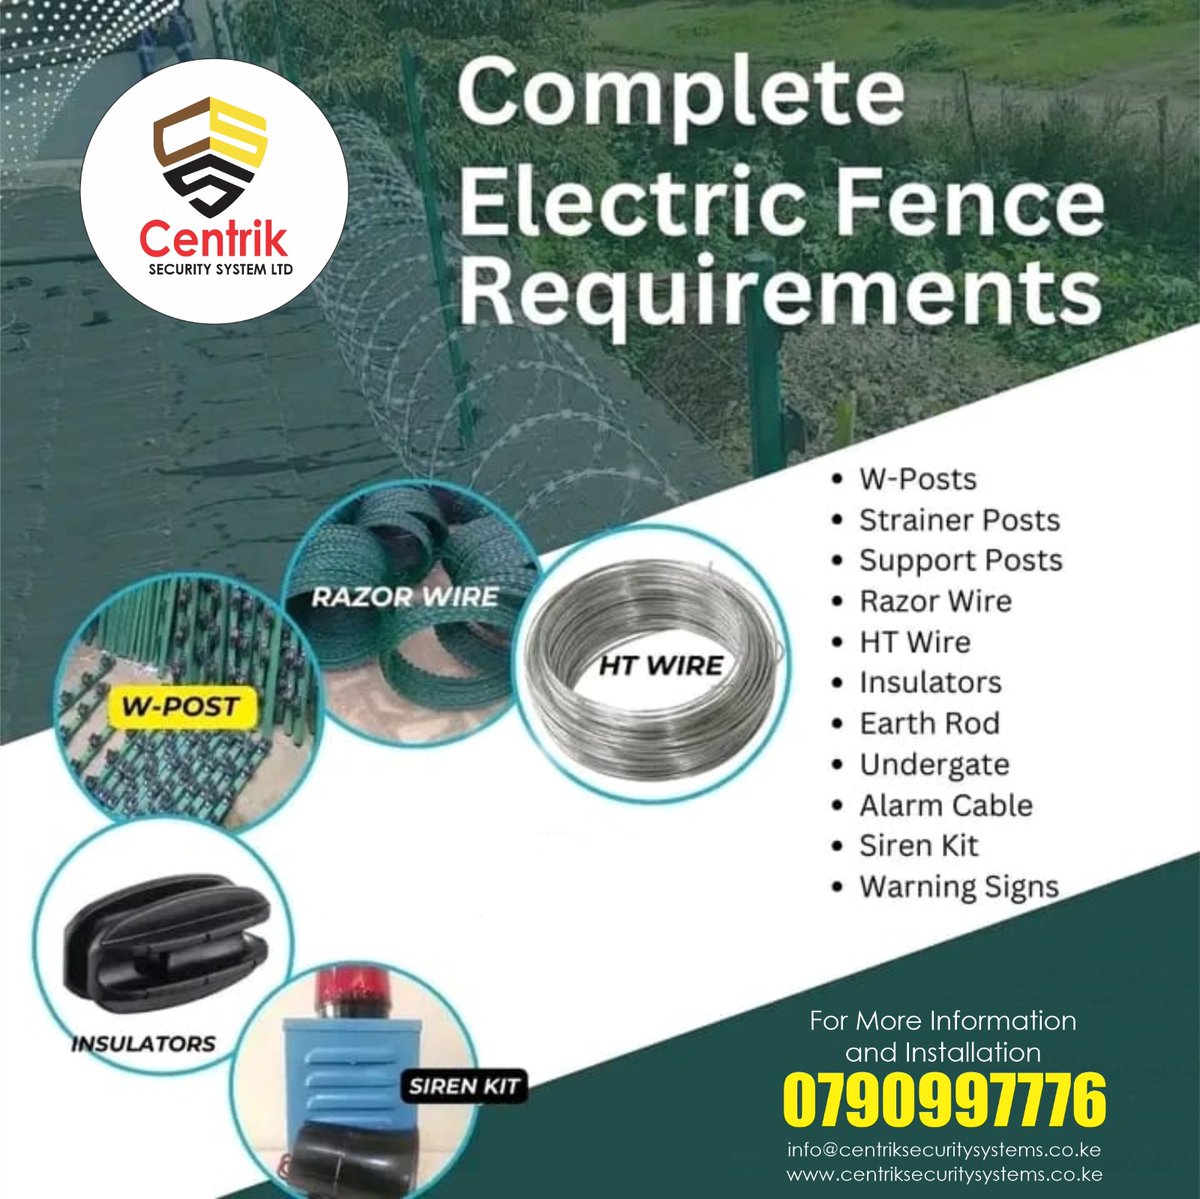 #TwendeShowmax
Elevate security with our electric fence essentials: energizer,wires, insulators,posts and grounding.your complete solution for safety and peace of mind #SecuritySolutions